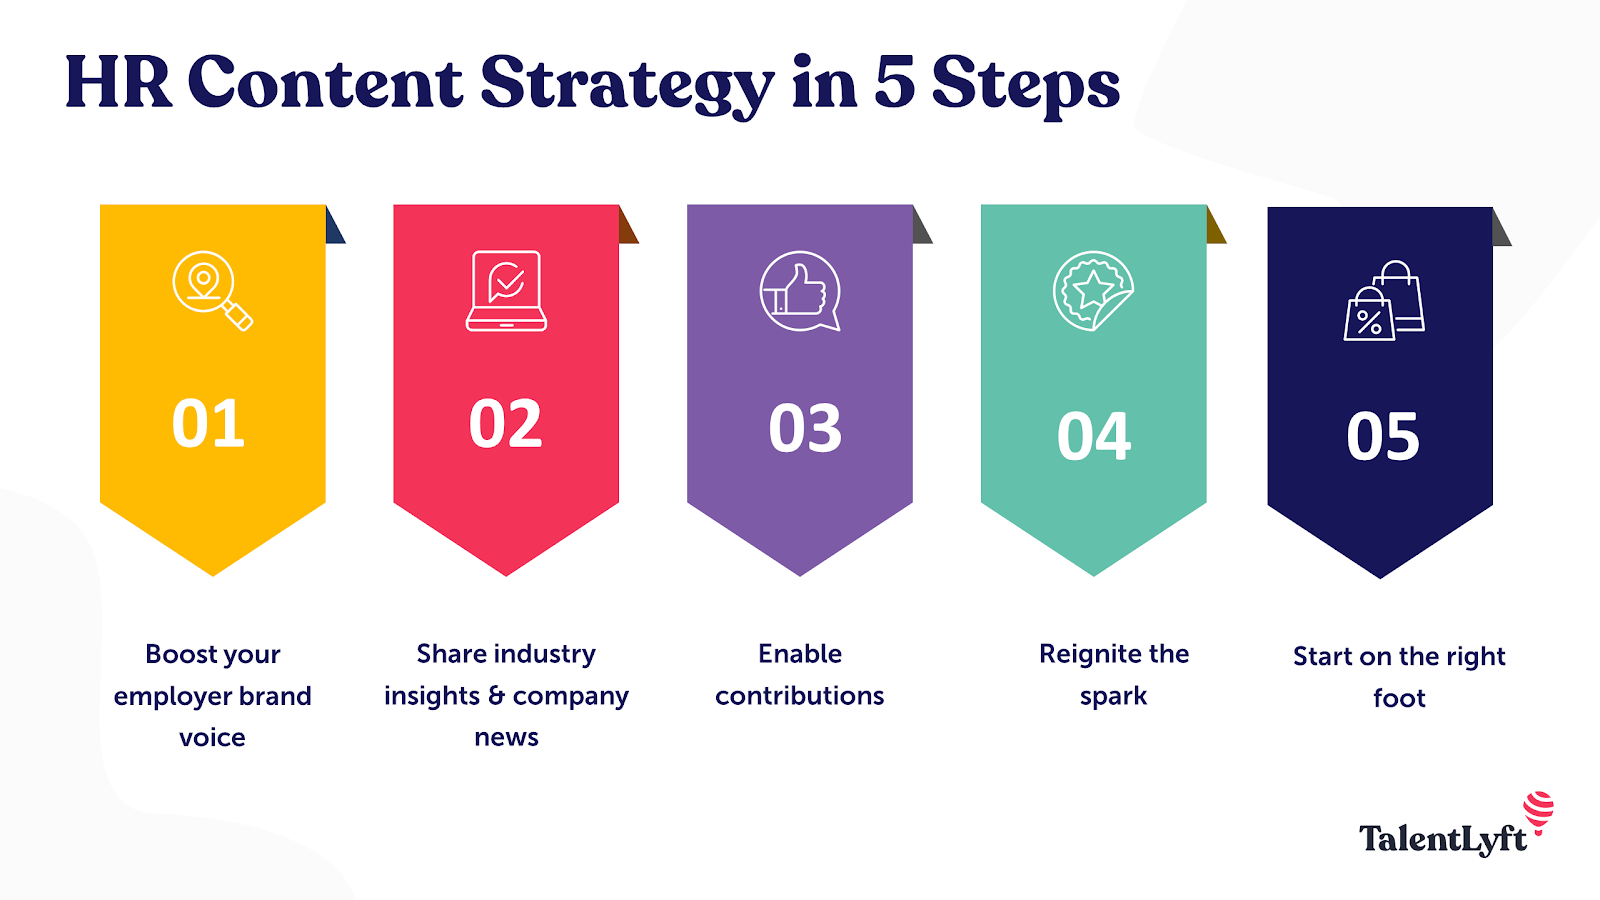 Build HR content strategy in 5 easy steps